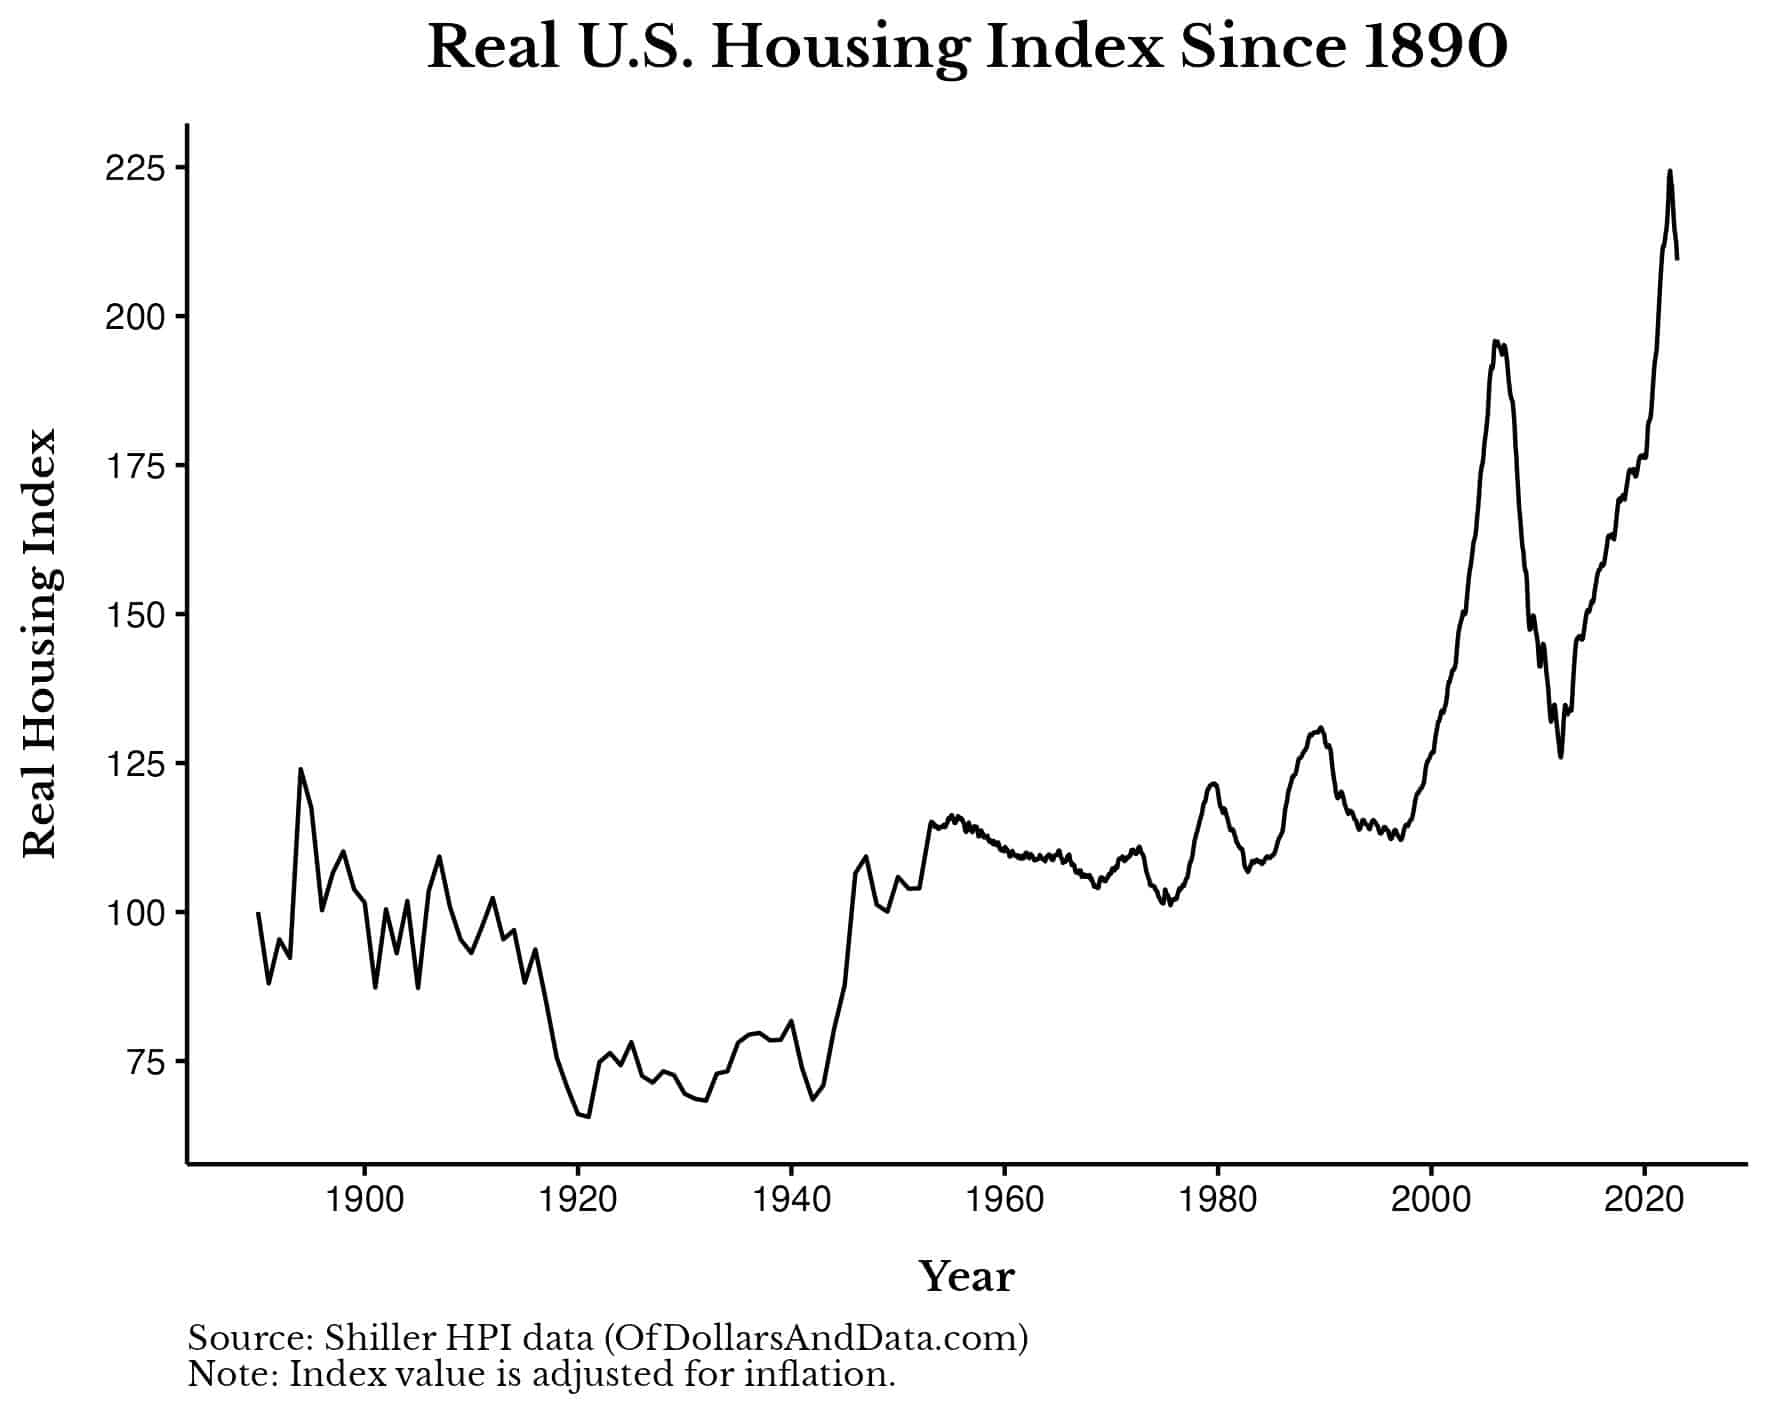 Chart of the U.S. housing index since 1890 from Robert Shiller. The data is adjusted for inflation and helps visualize "why are houses so expensive?"